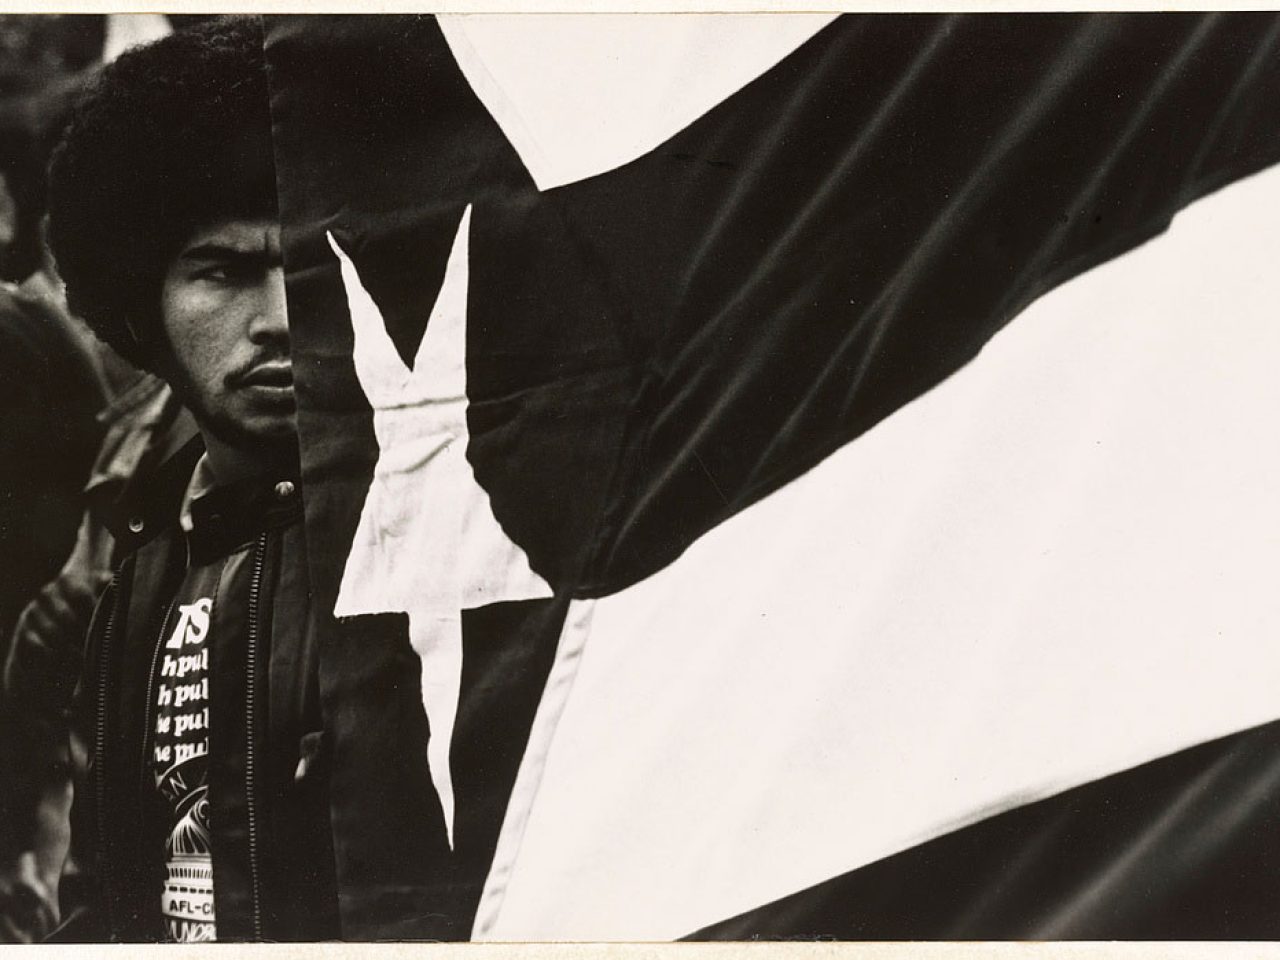 Black and white photograph of a man next to Puerto Rican flag